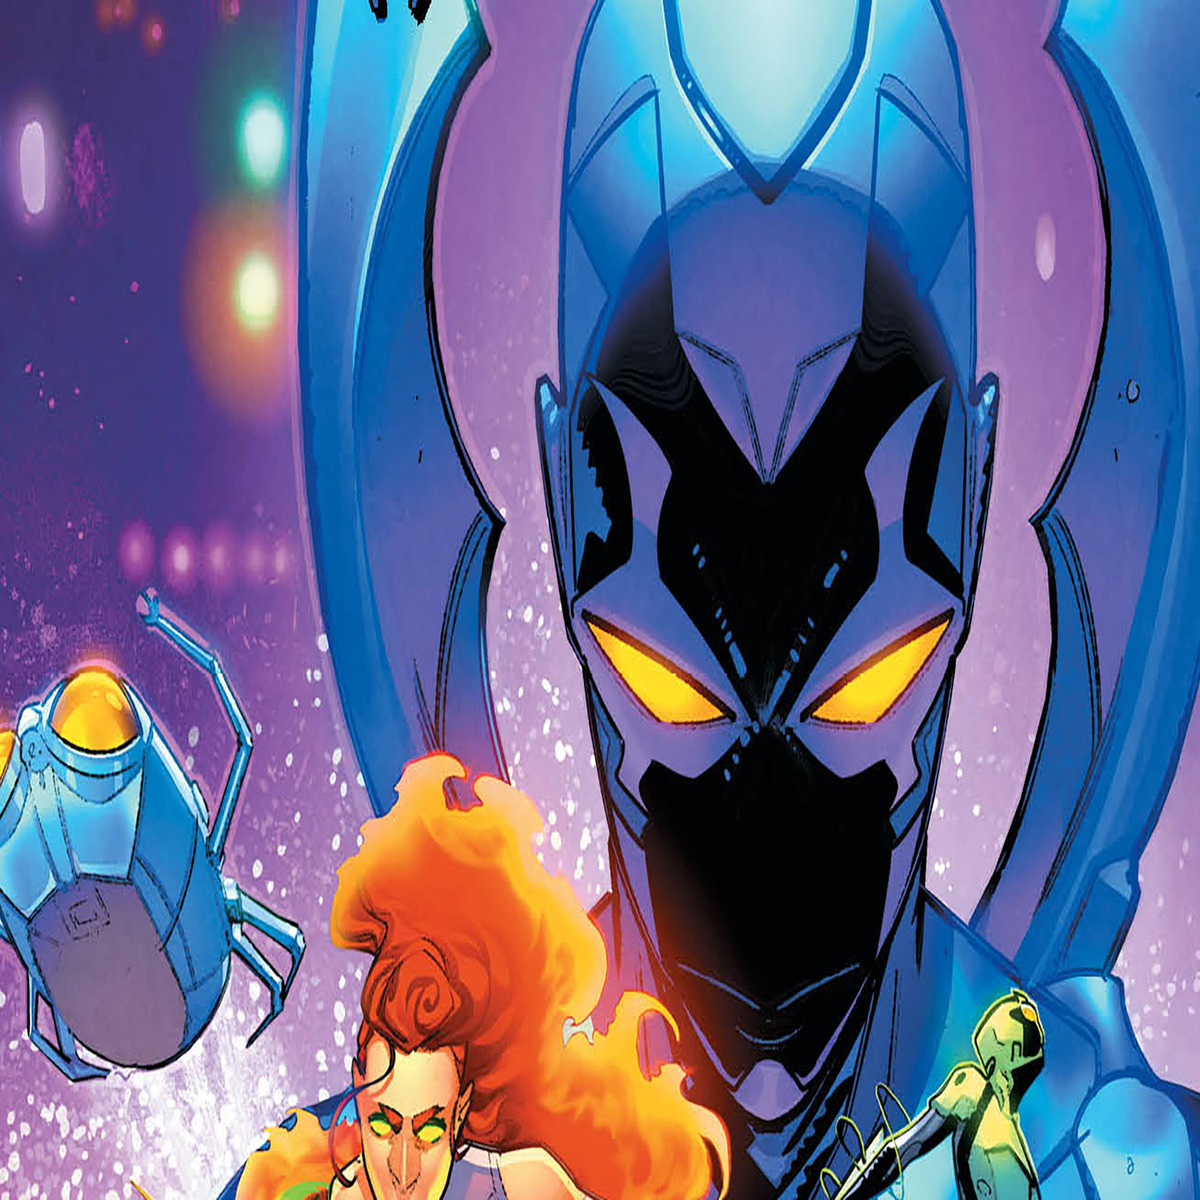 Blue Beetle is getting an ongoing DC comic book to debut alongside